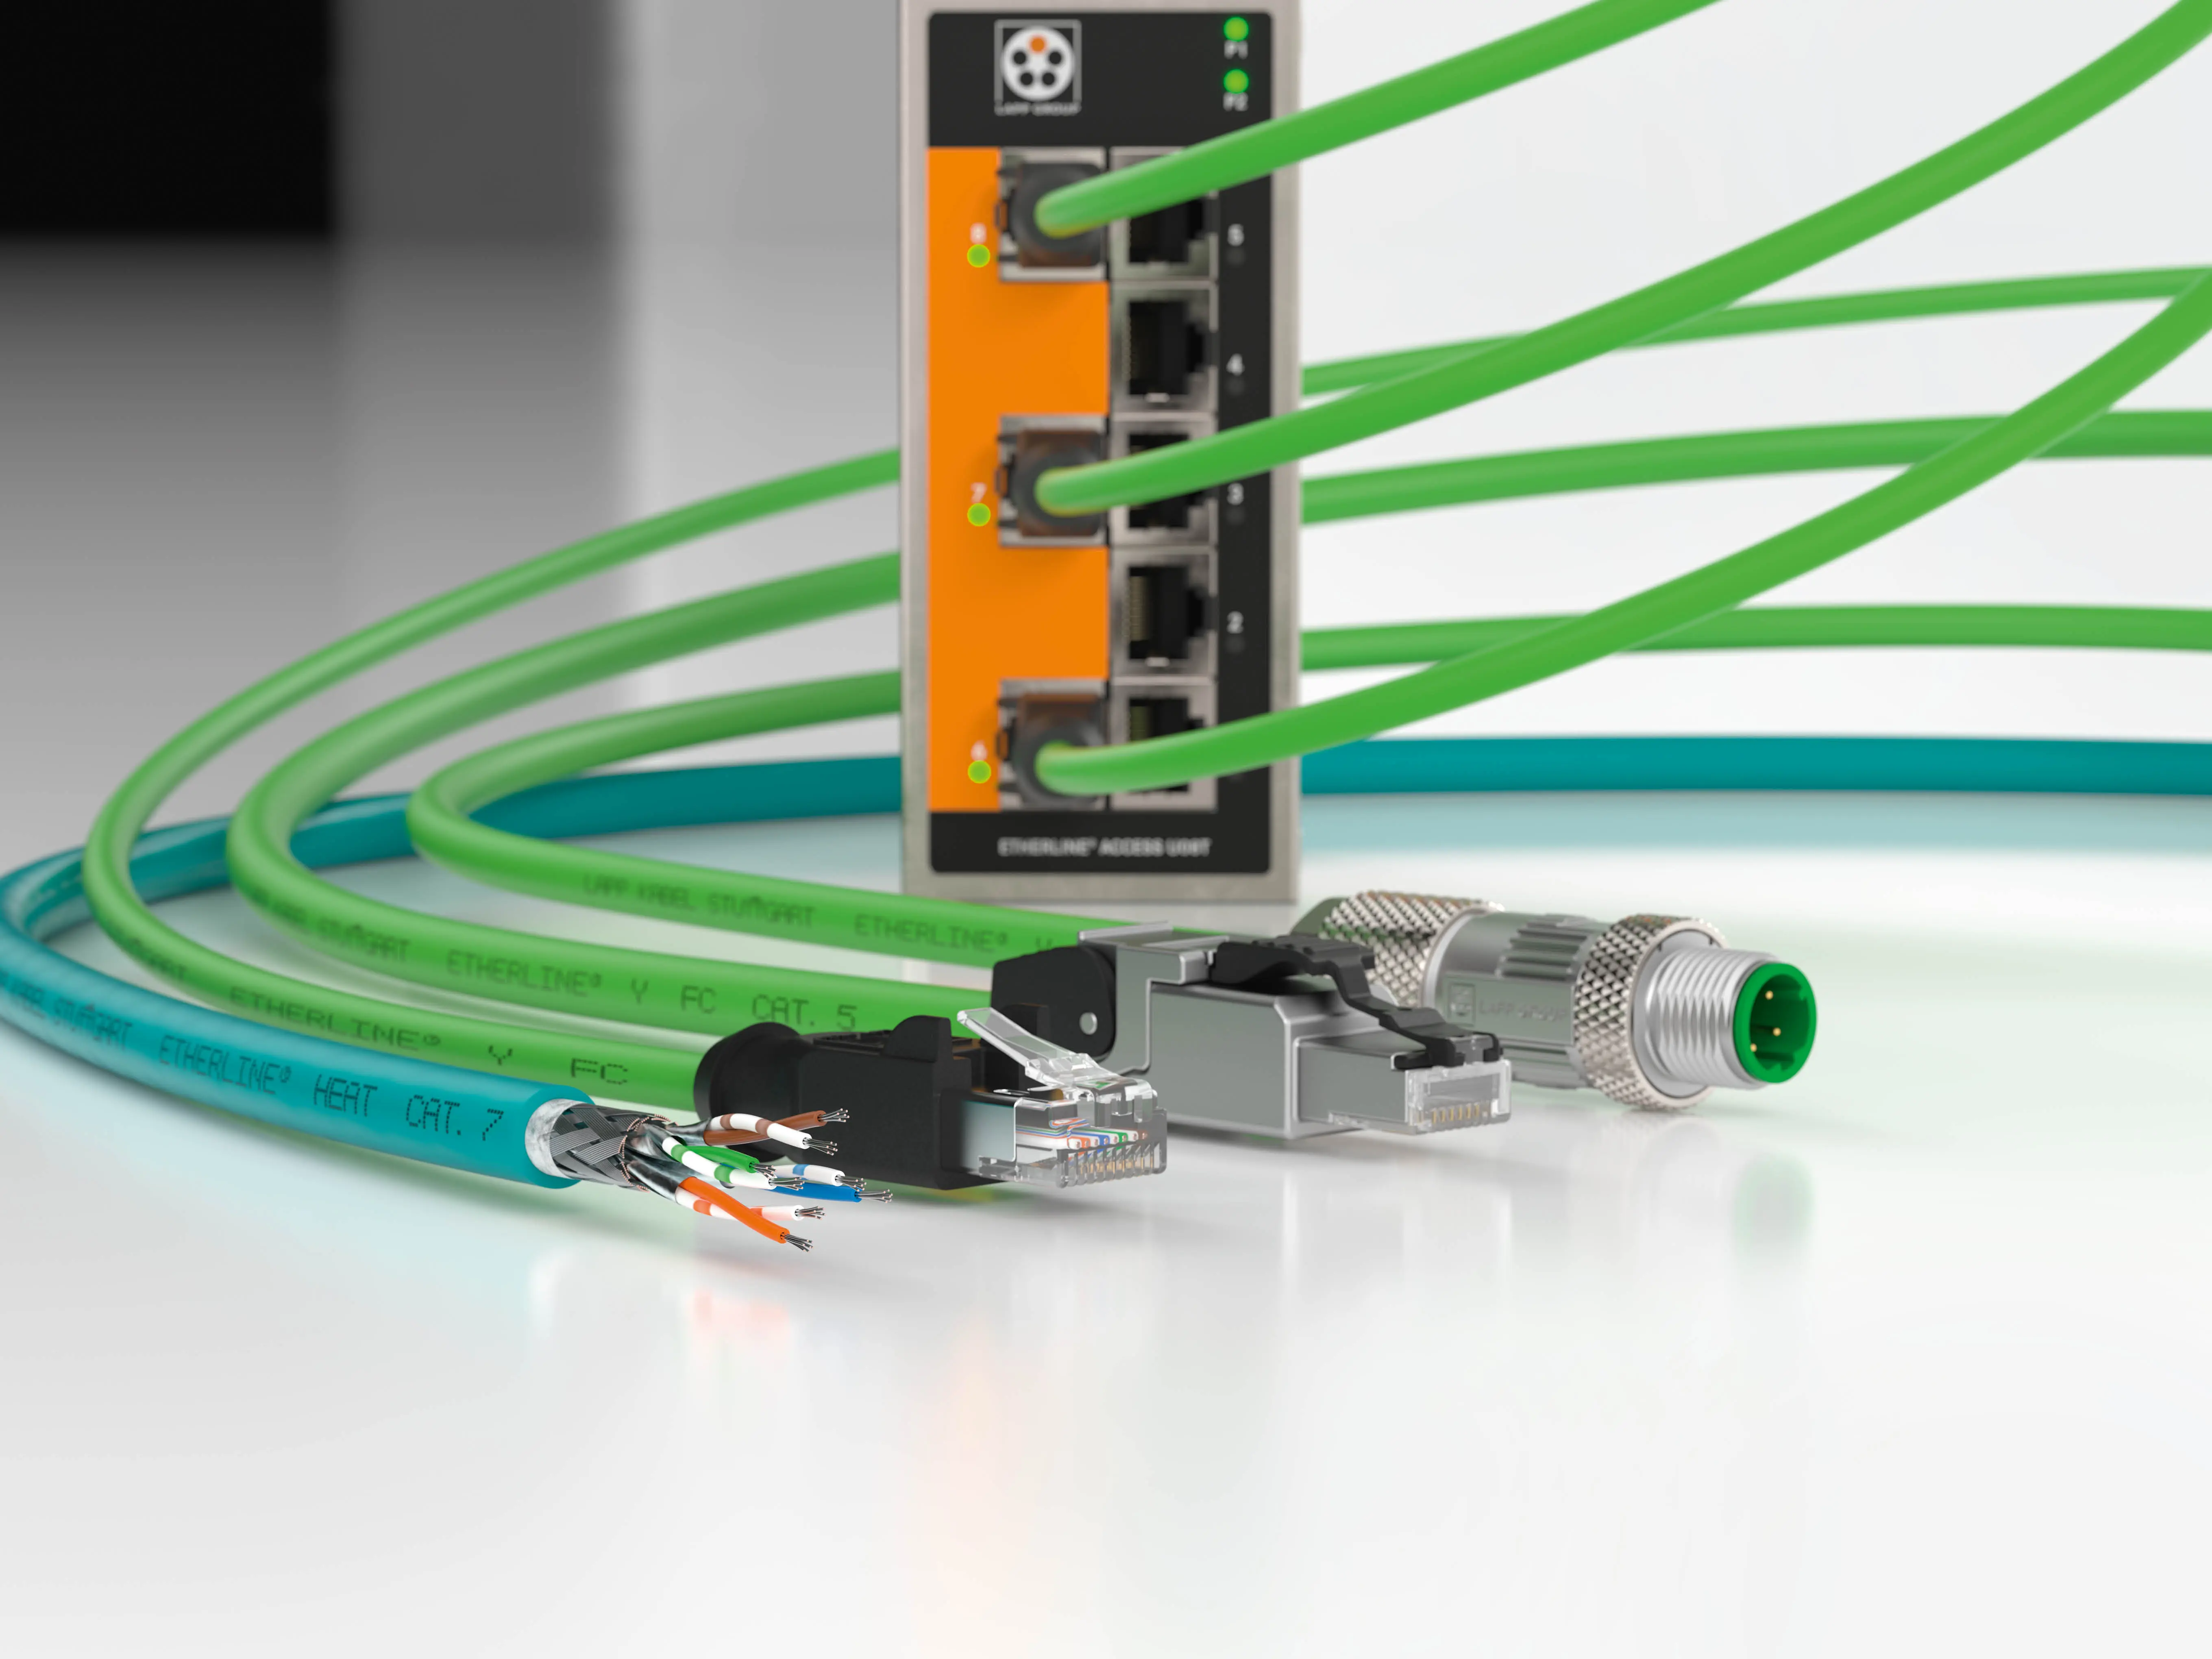 ETHERLINE® data transmission systems from LAPP